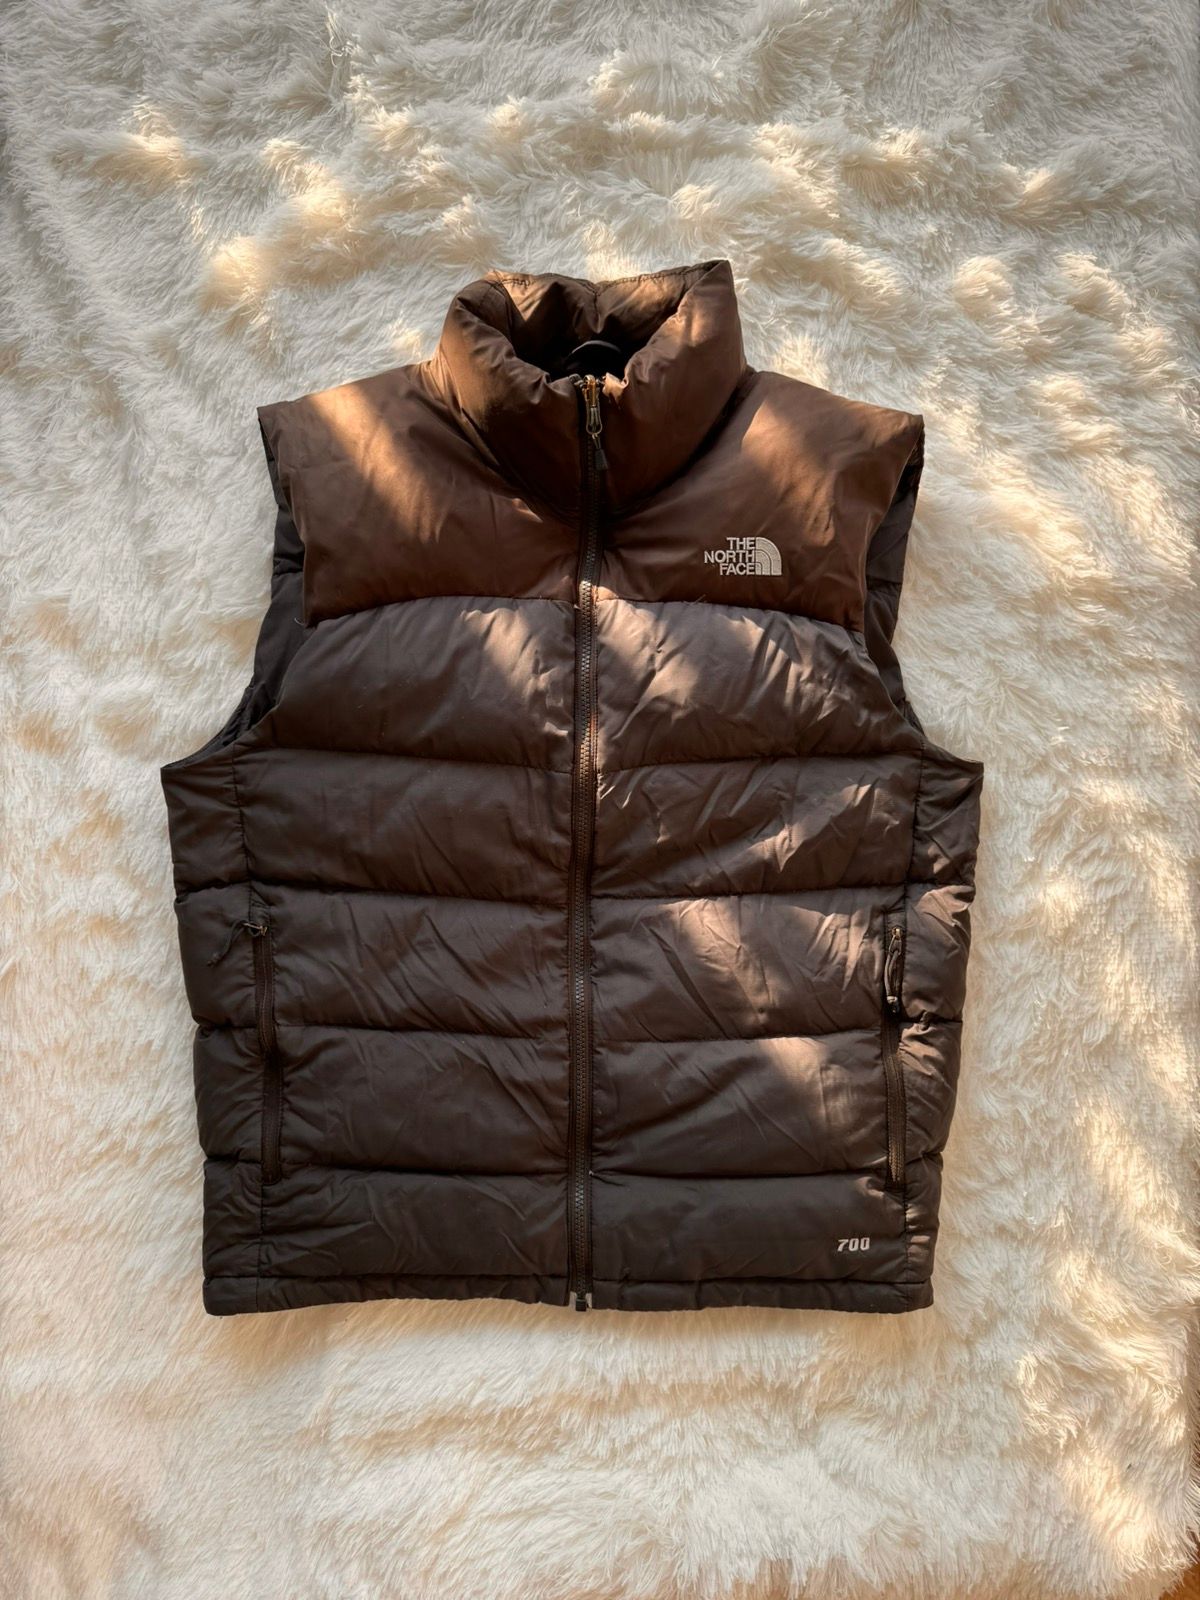 Pre-owned The North Face X Vintage The North Face 700 Brown Puffer Down Vest